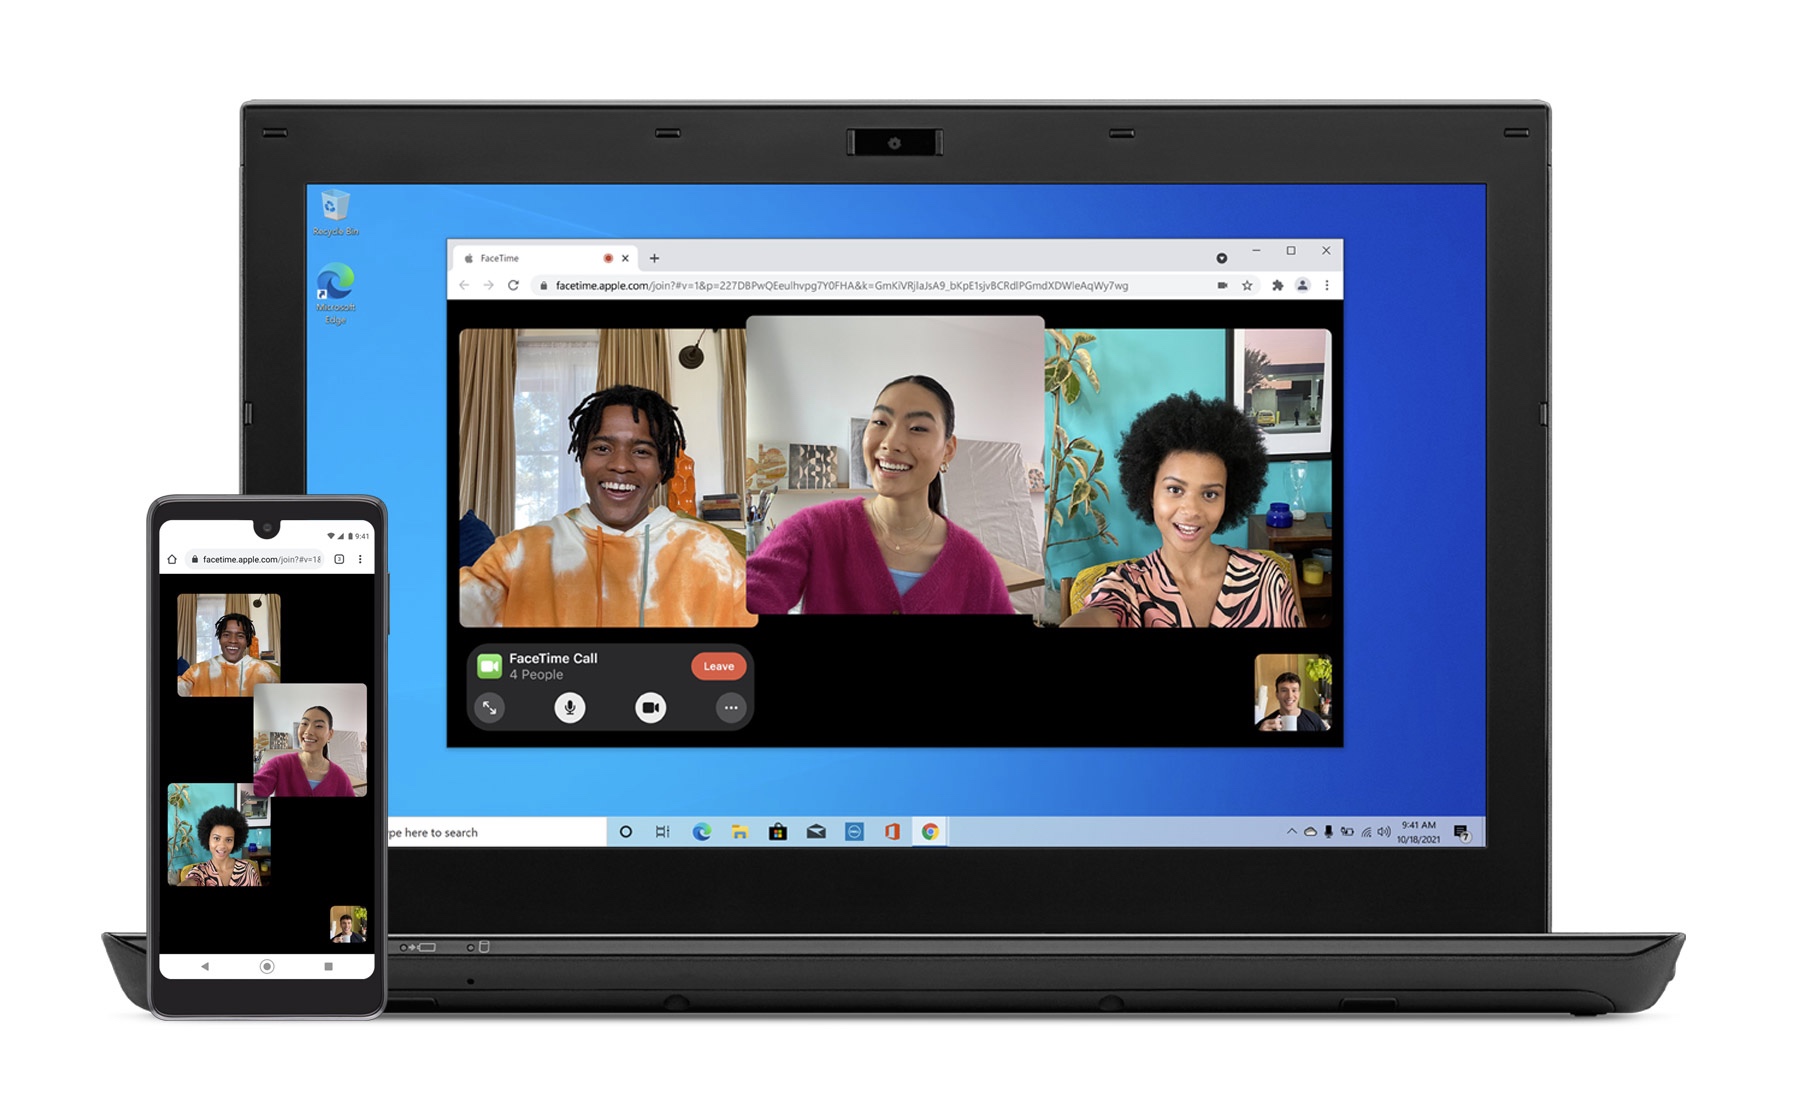 FaceTime is available on non-Apple devices now.